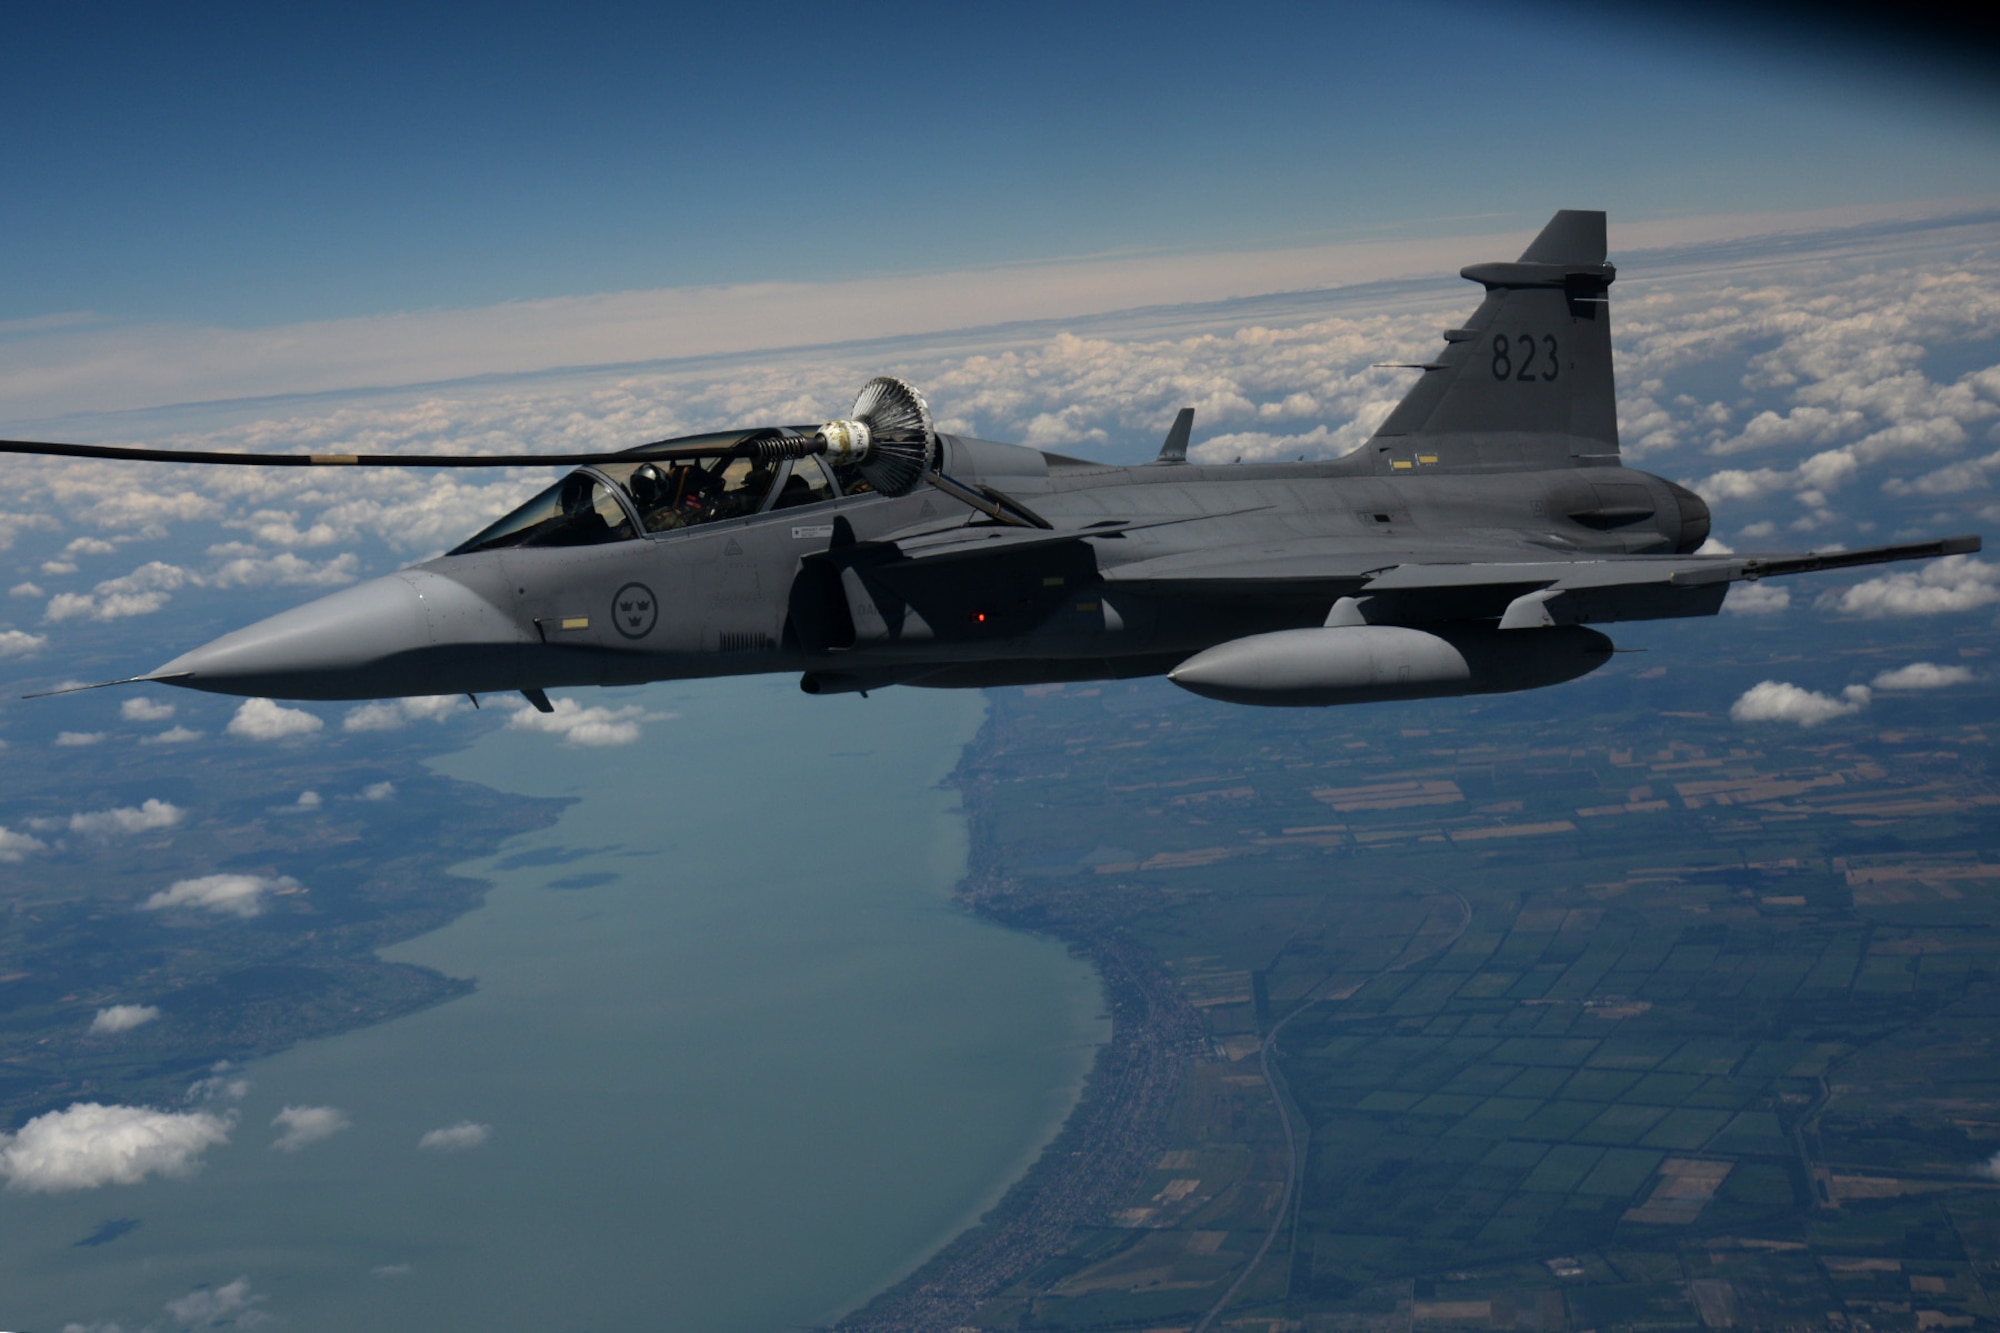 A Swedish air force JAS-39 Gripen makes contact with a multi-point refueling system basket June 25, 2015, during air refueling familiarization training over Hungary. Hungarian, U.S. and Swedish air force personnel met for a two-week familiarization period enabling the Hungarian JAS-39 Gripen pilots to successfully perform air refueling for the first time. (U.S. Air Force photo by Senior Airman Kate Thornton/Released)